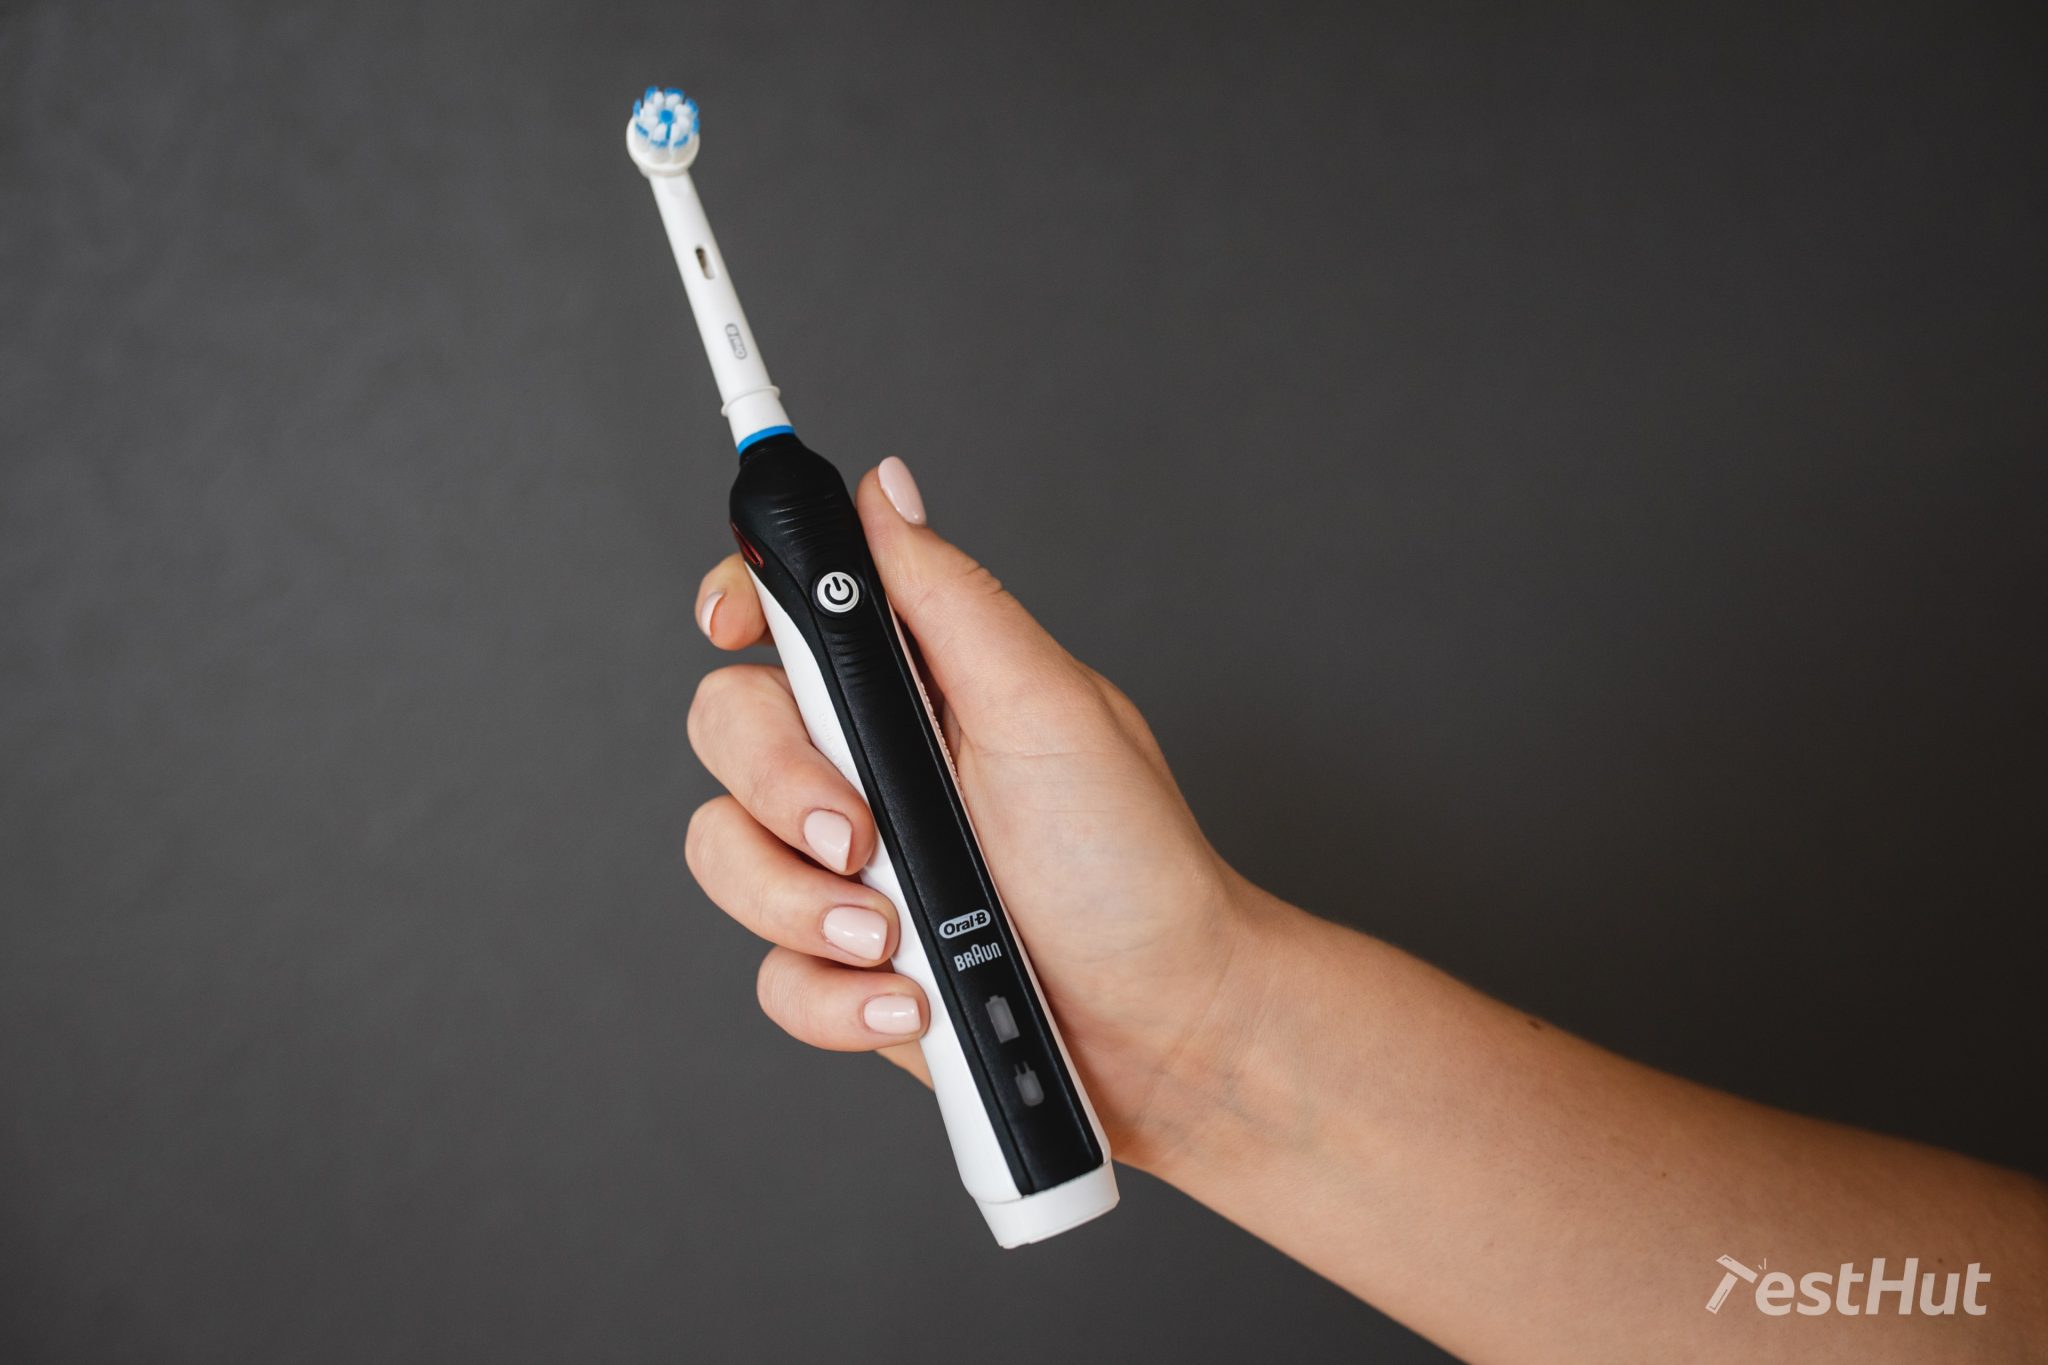 Best Electric Toothbrush Maker OralB vs. Sonicare Tested by TestHut